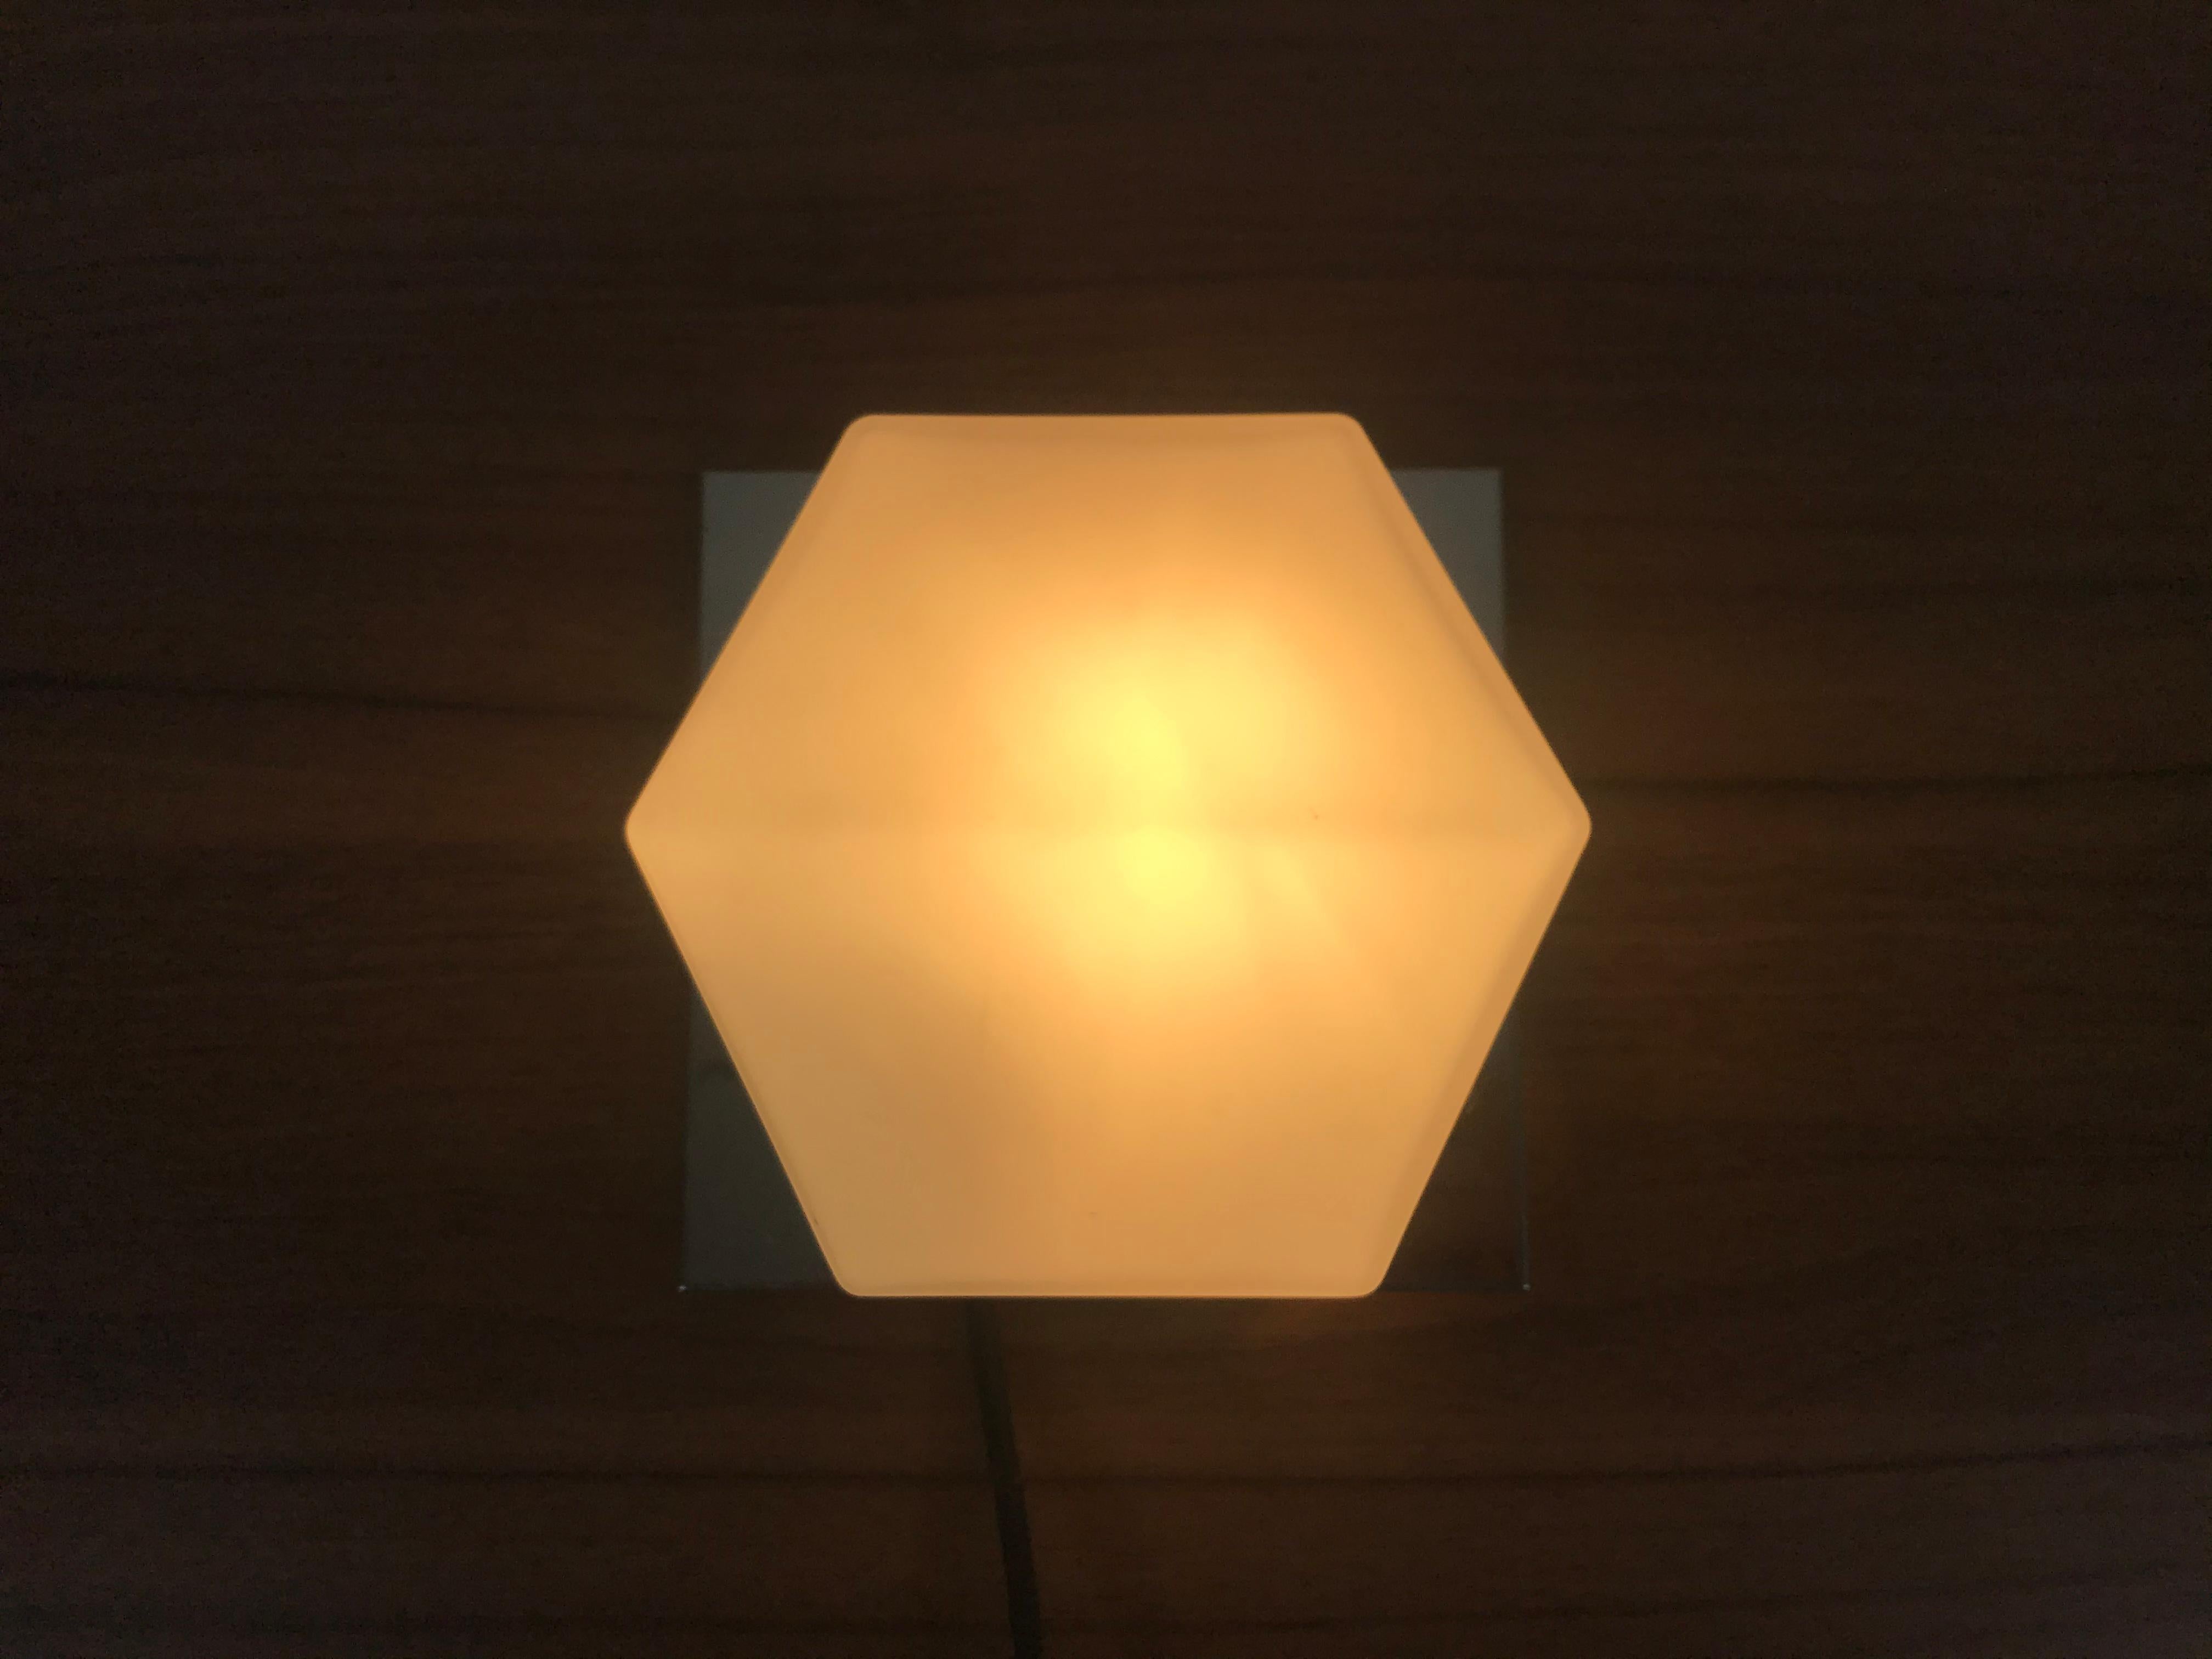 A beautiful Mid-Century Modern wall lamp by Glashütte Limburg made in Germany in the 1970s. It has a beautiful rectangle shape and is made of aluminium and opaline glass. 

The light requires one E14 light bulb.